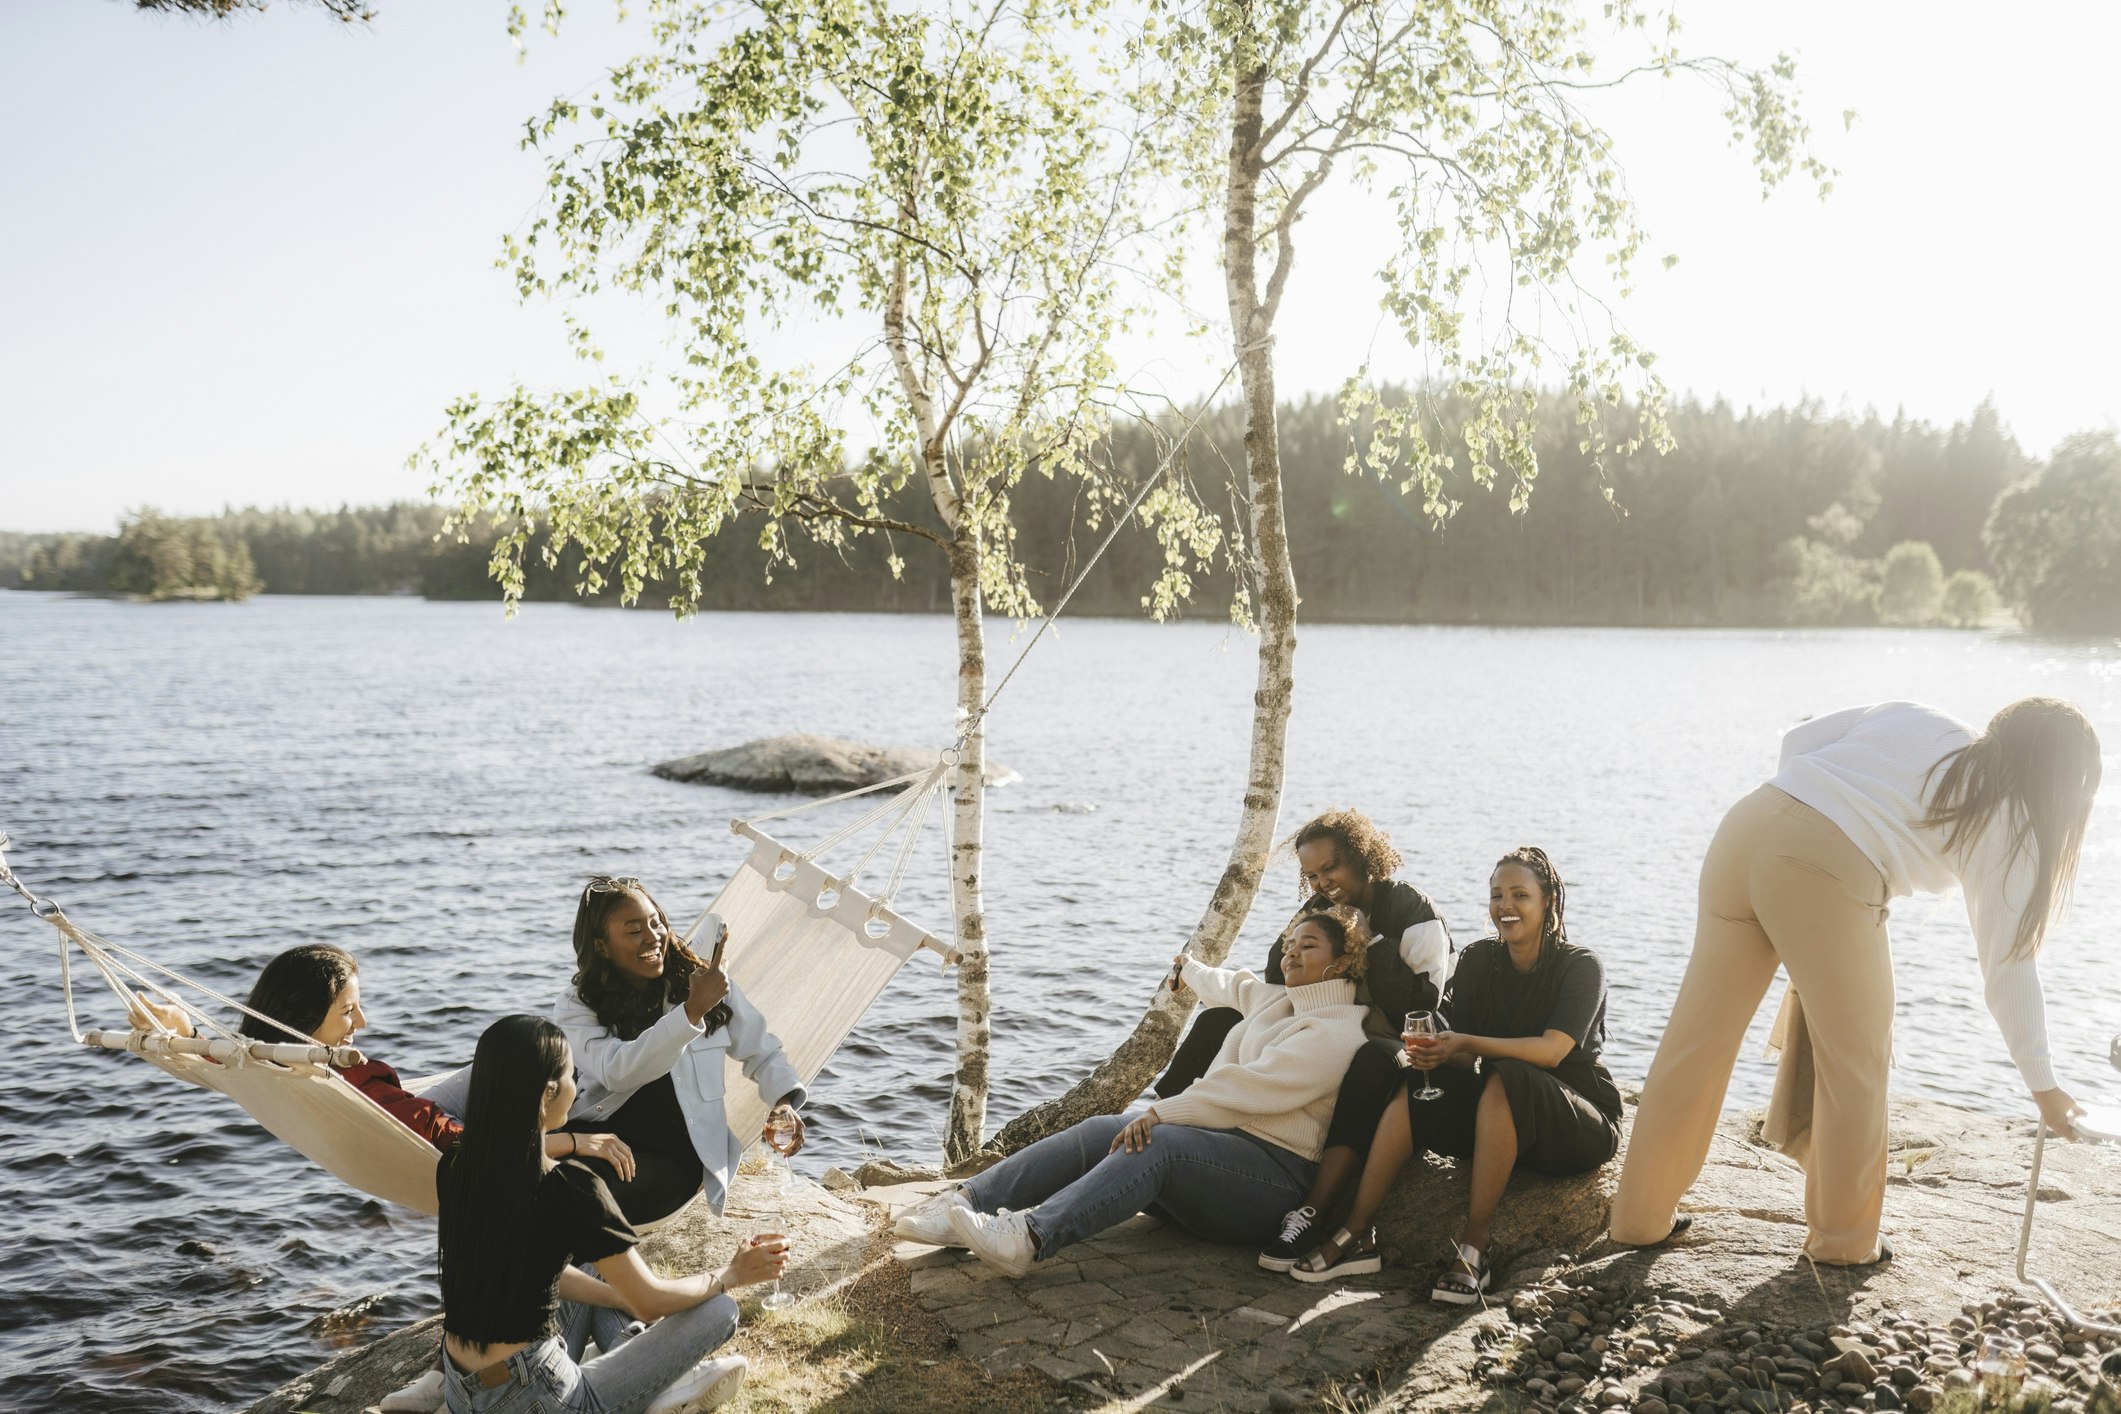 A group of female friends hanging out by a lake on sunny day